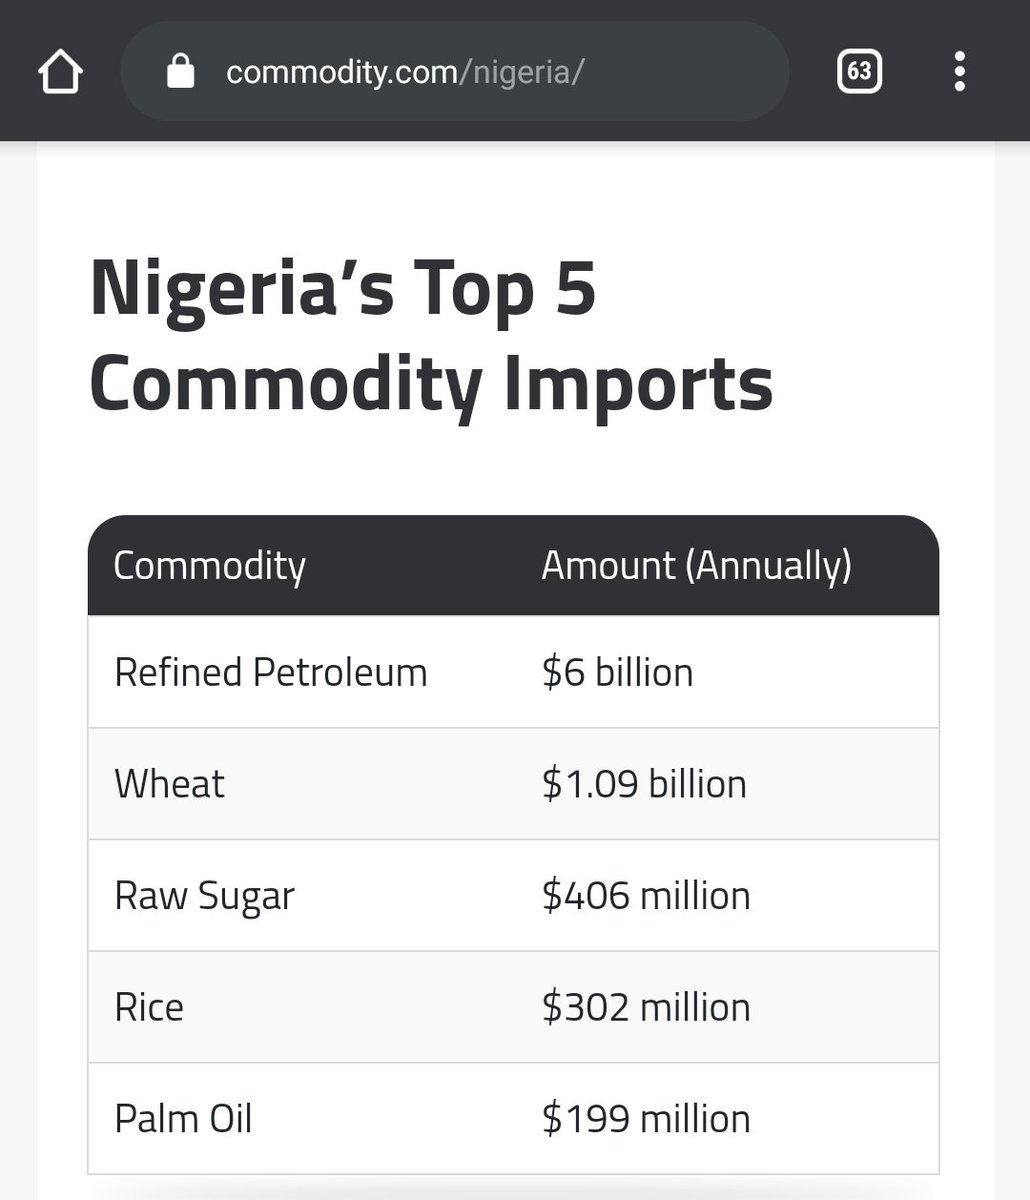 Why not go back to 1999 IFEM when the exchange rate was $1 - N22. / $1 - N88 so that we can tell the story properly. What puts pressure on the Naira? What makes it fall against the dollar? Demand for imports!! Can you list 5 items that were sourced locally in your house?  https://twitter.com/OluyomiOjo/status/1280197867416805378